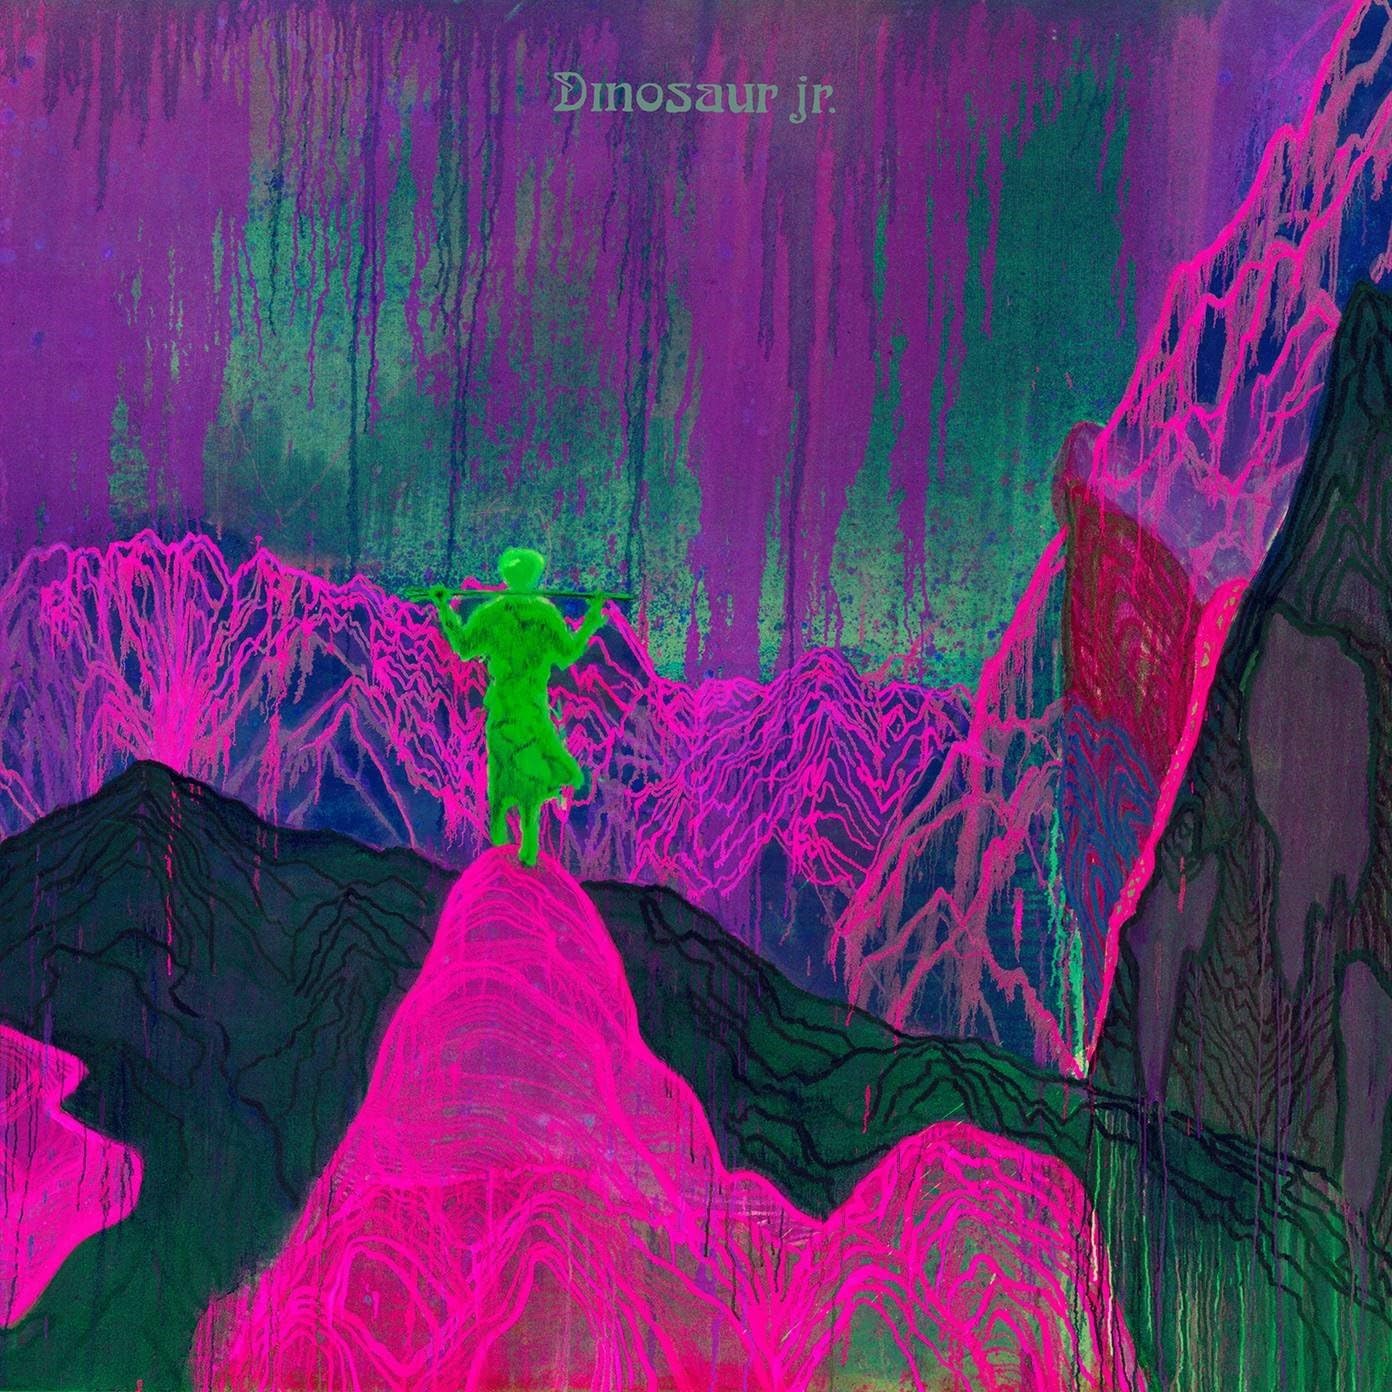 Give a Glimpse of What Yer Not | Dinosaur Jr.